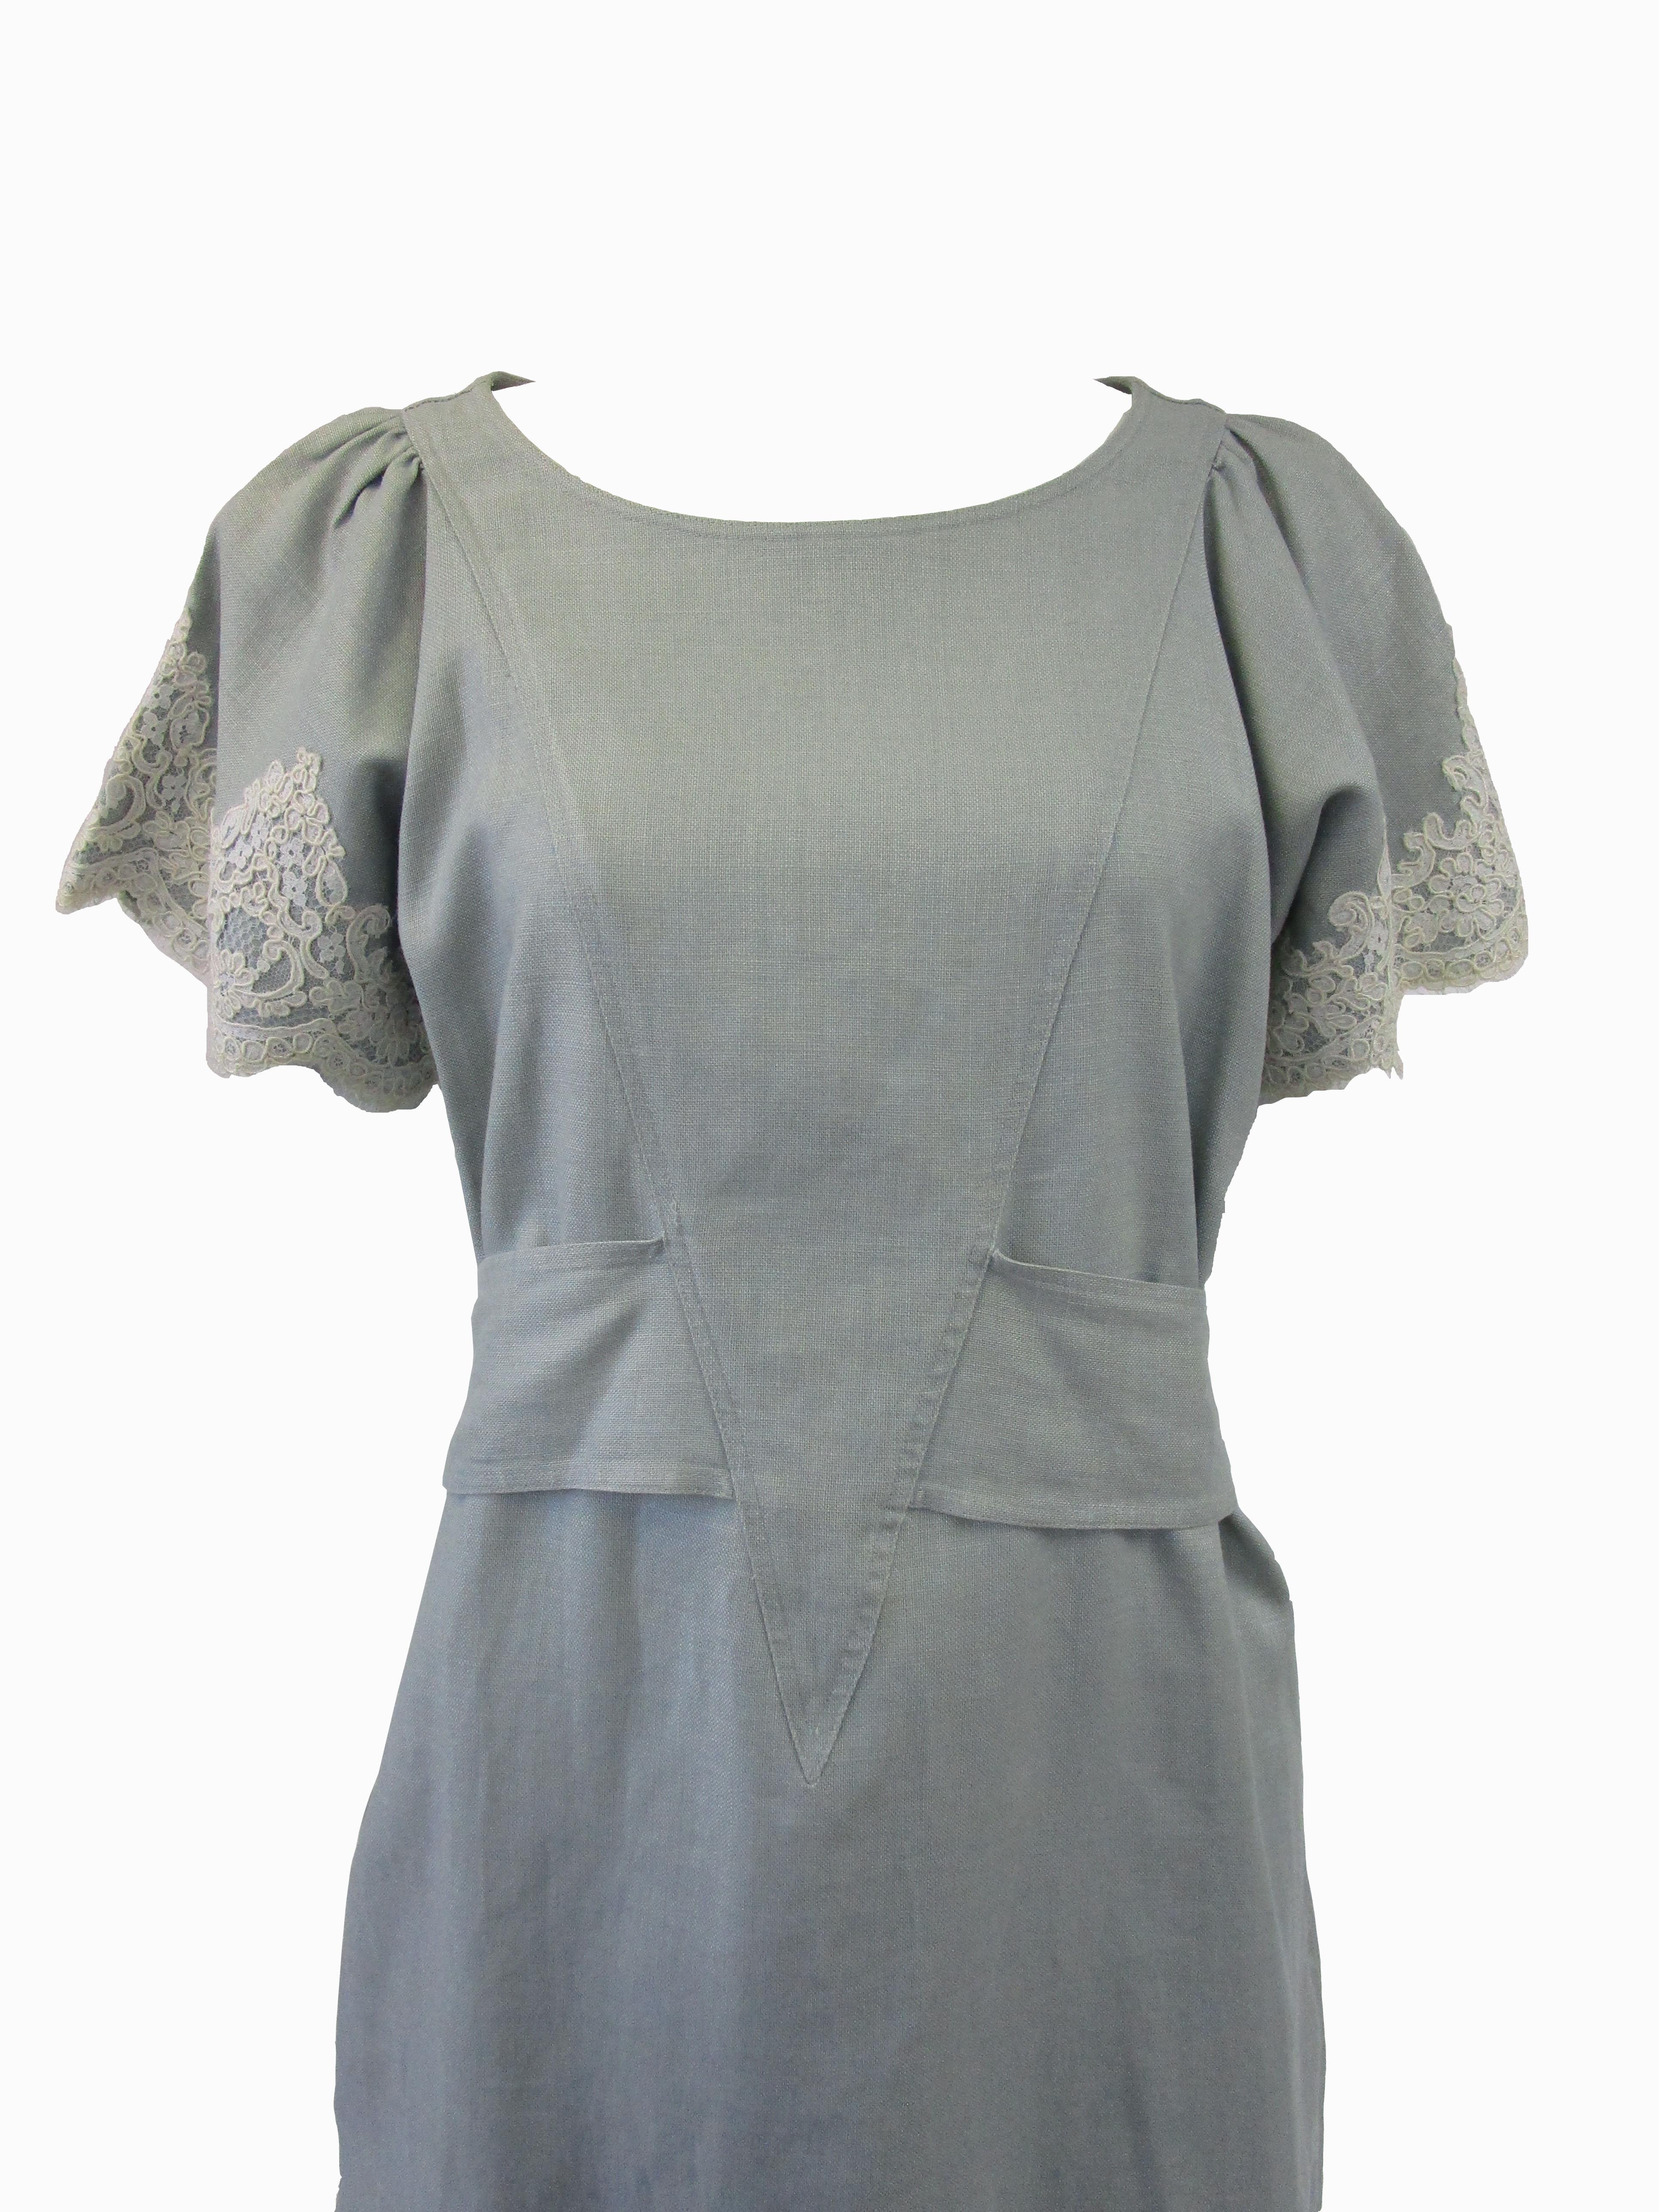 
Lovely day dress from Geoffrey Beene! This dress features a dusty miller colored linen fabric in a shift silhouette with a structured tie around the waist that can be adjusted to the wearer. It is accented by beautiful bridal lace details around